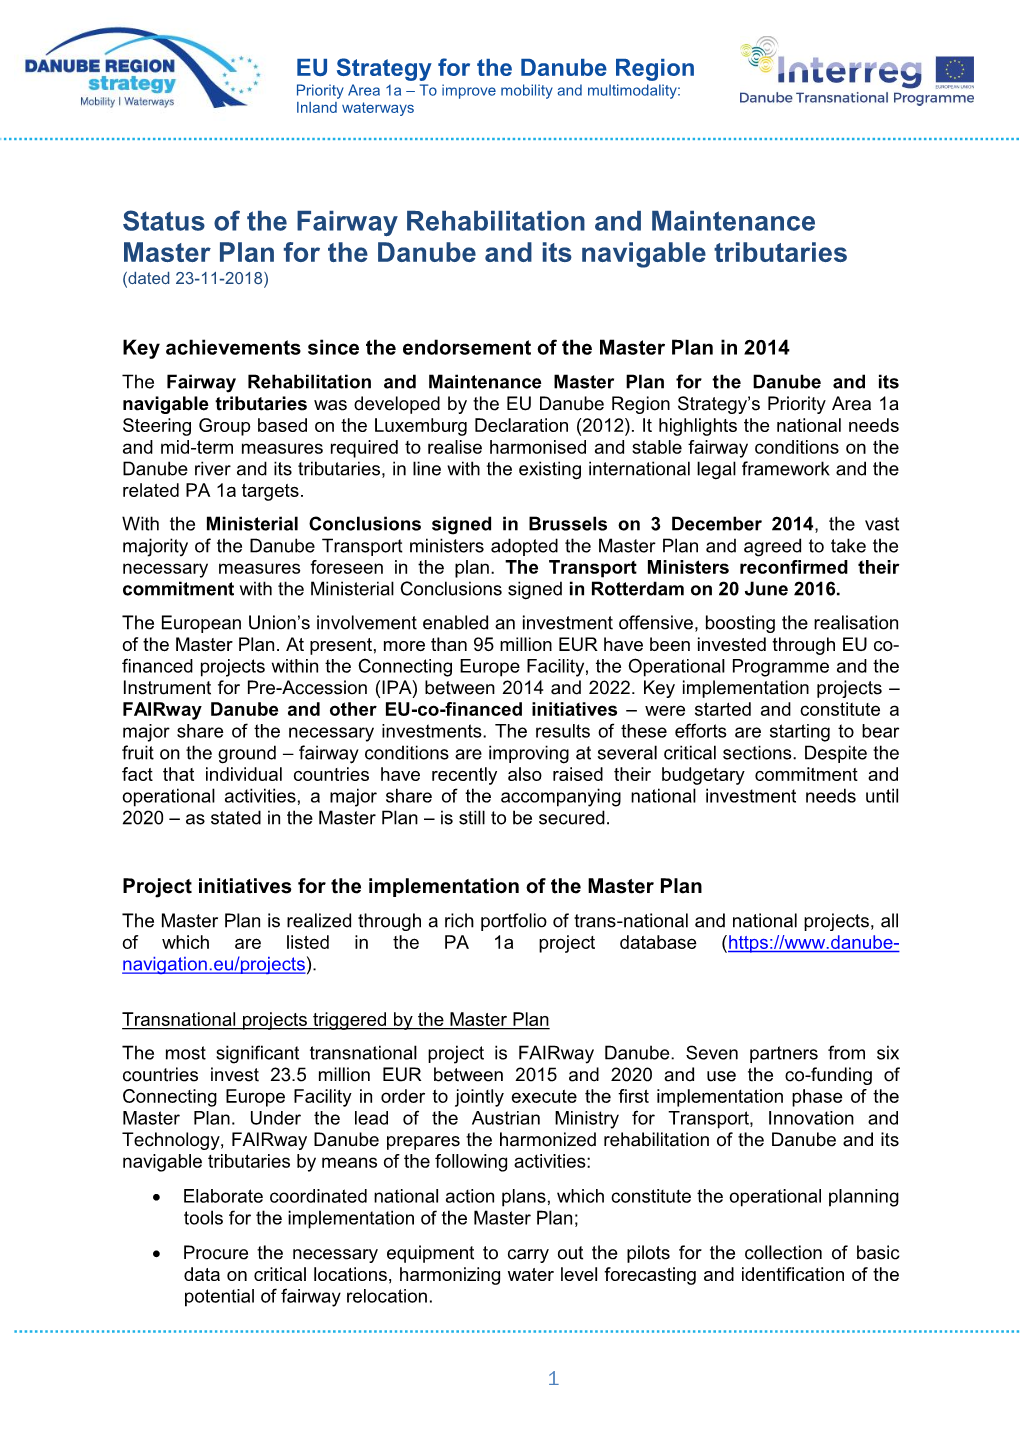 Status of the Fairway Rehabilitation and Maintenance Master Plan for the Danube and Its Navigable Tributaries (Dated 23-11-2018)